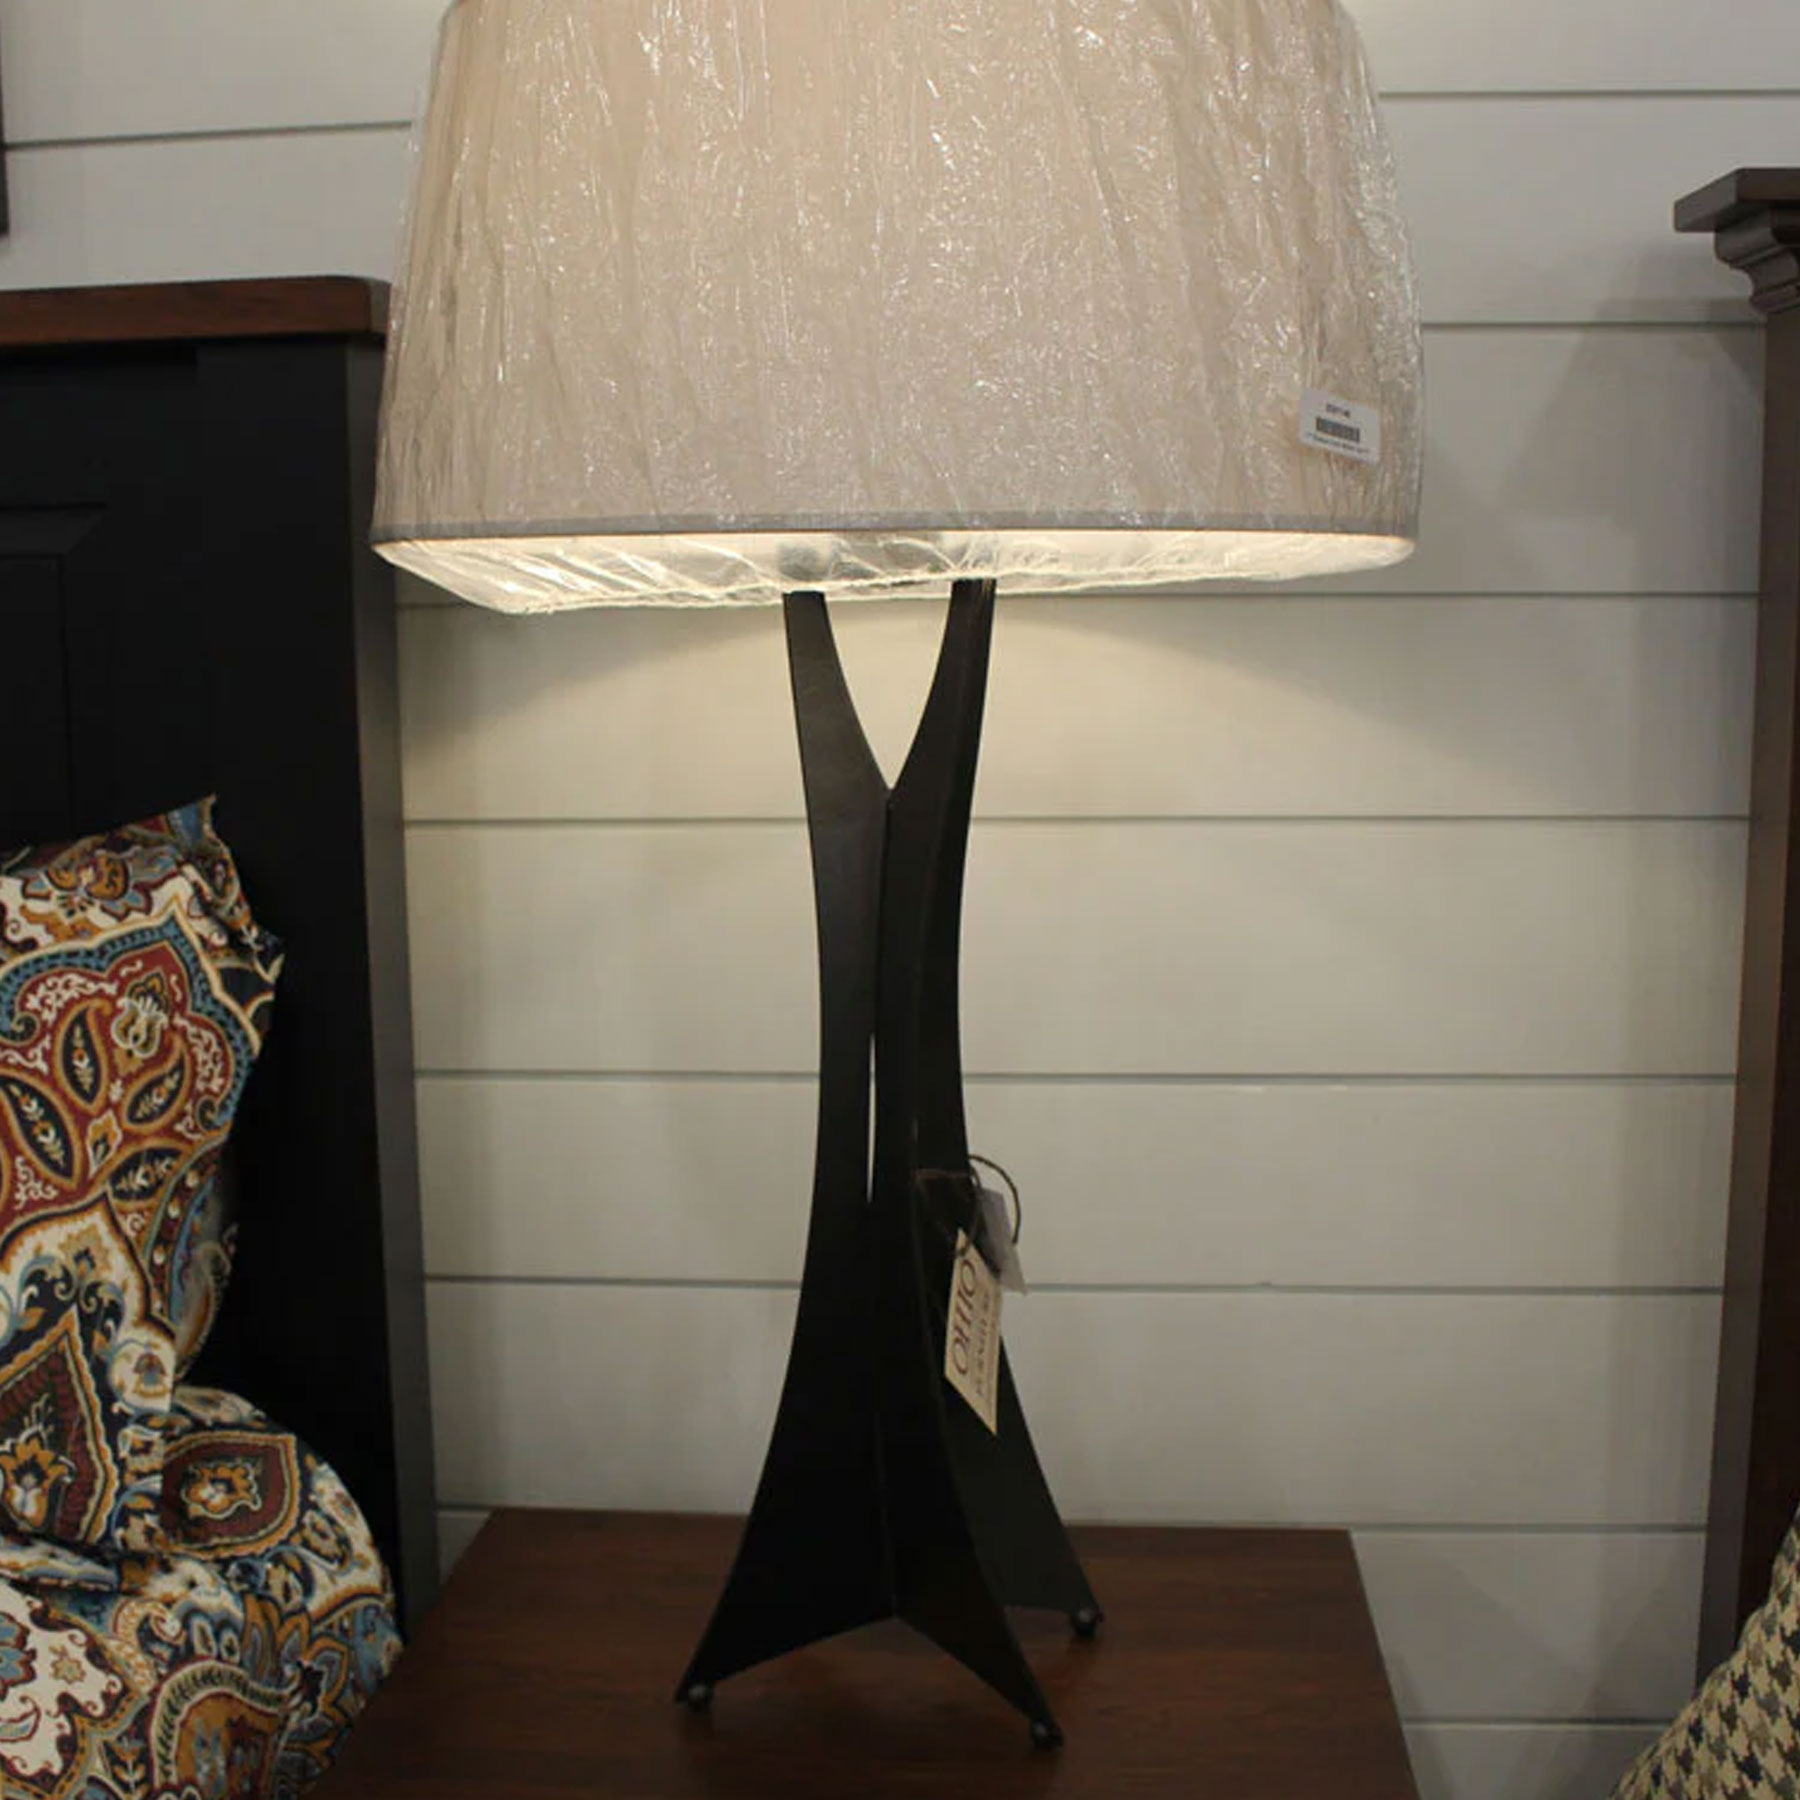 Hubbardton Forge Moreau Tall Table Lamp with Empire Flax Shade